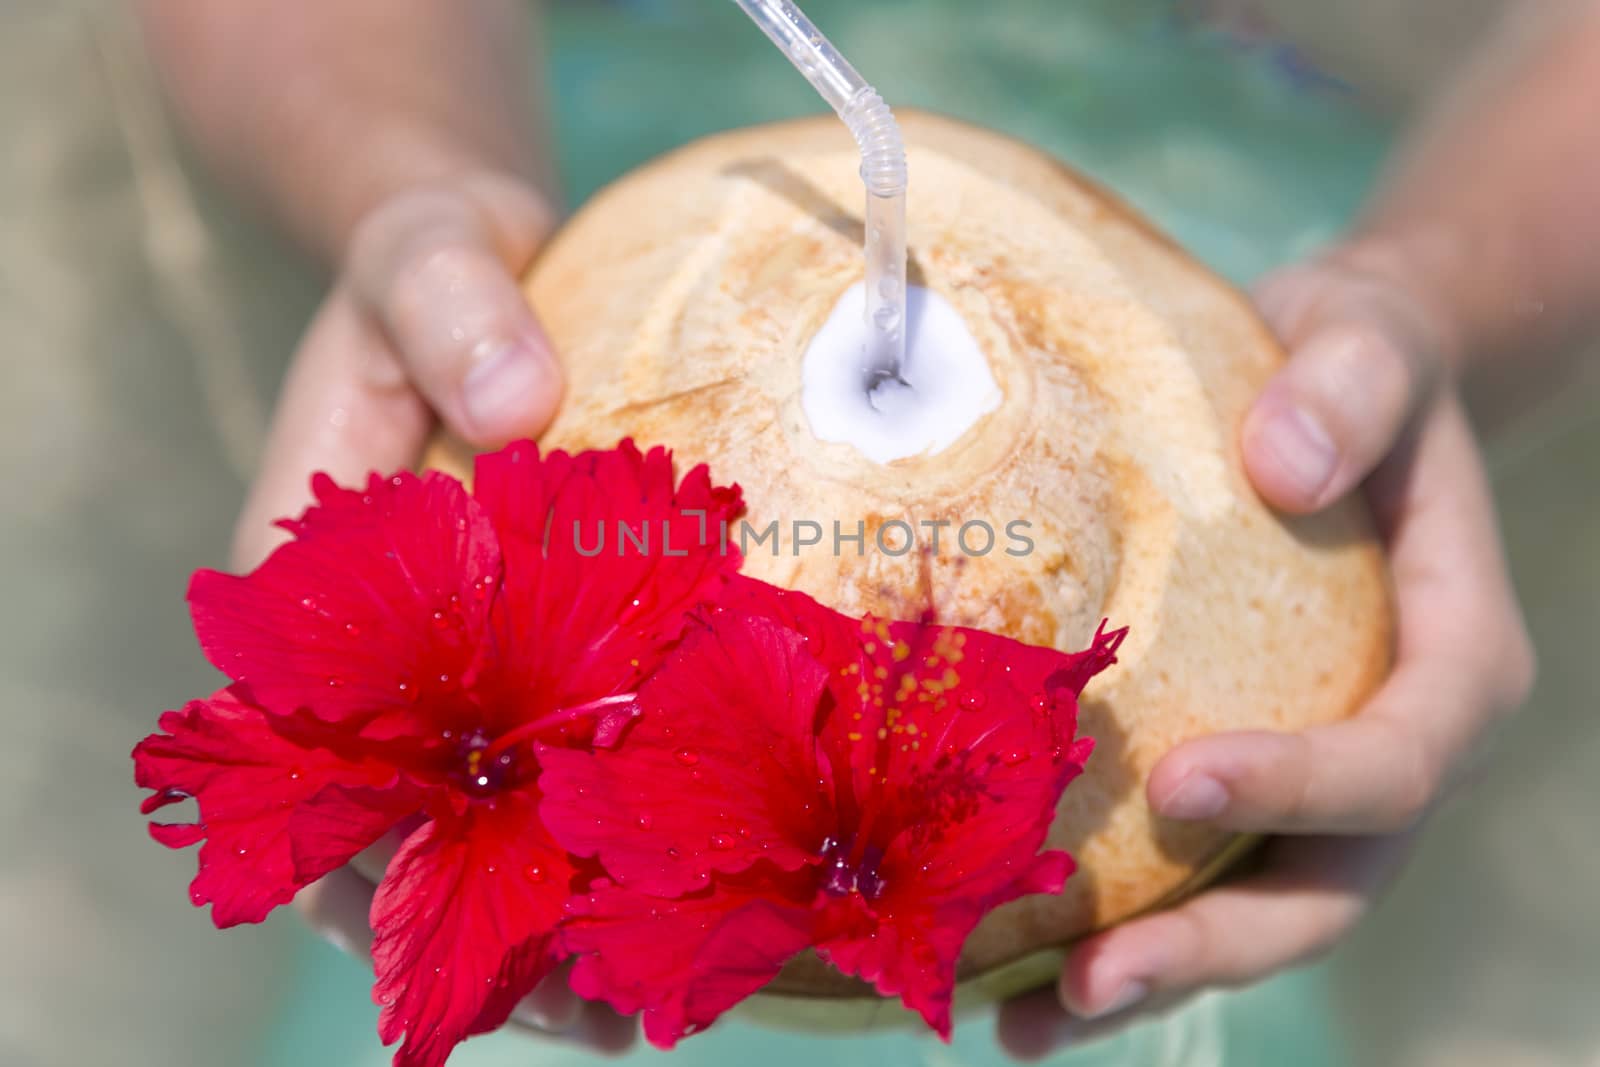 Male hands holding coconut with red flower and a clear straw in the water.